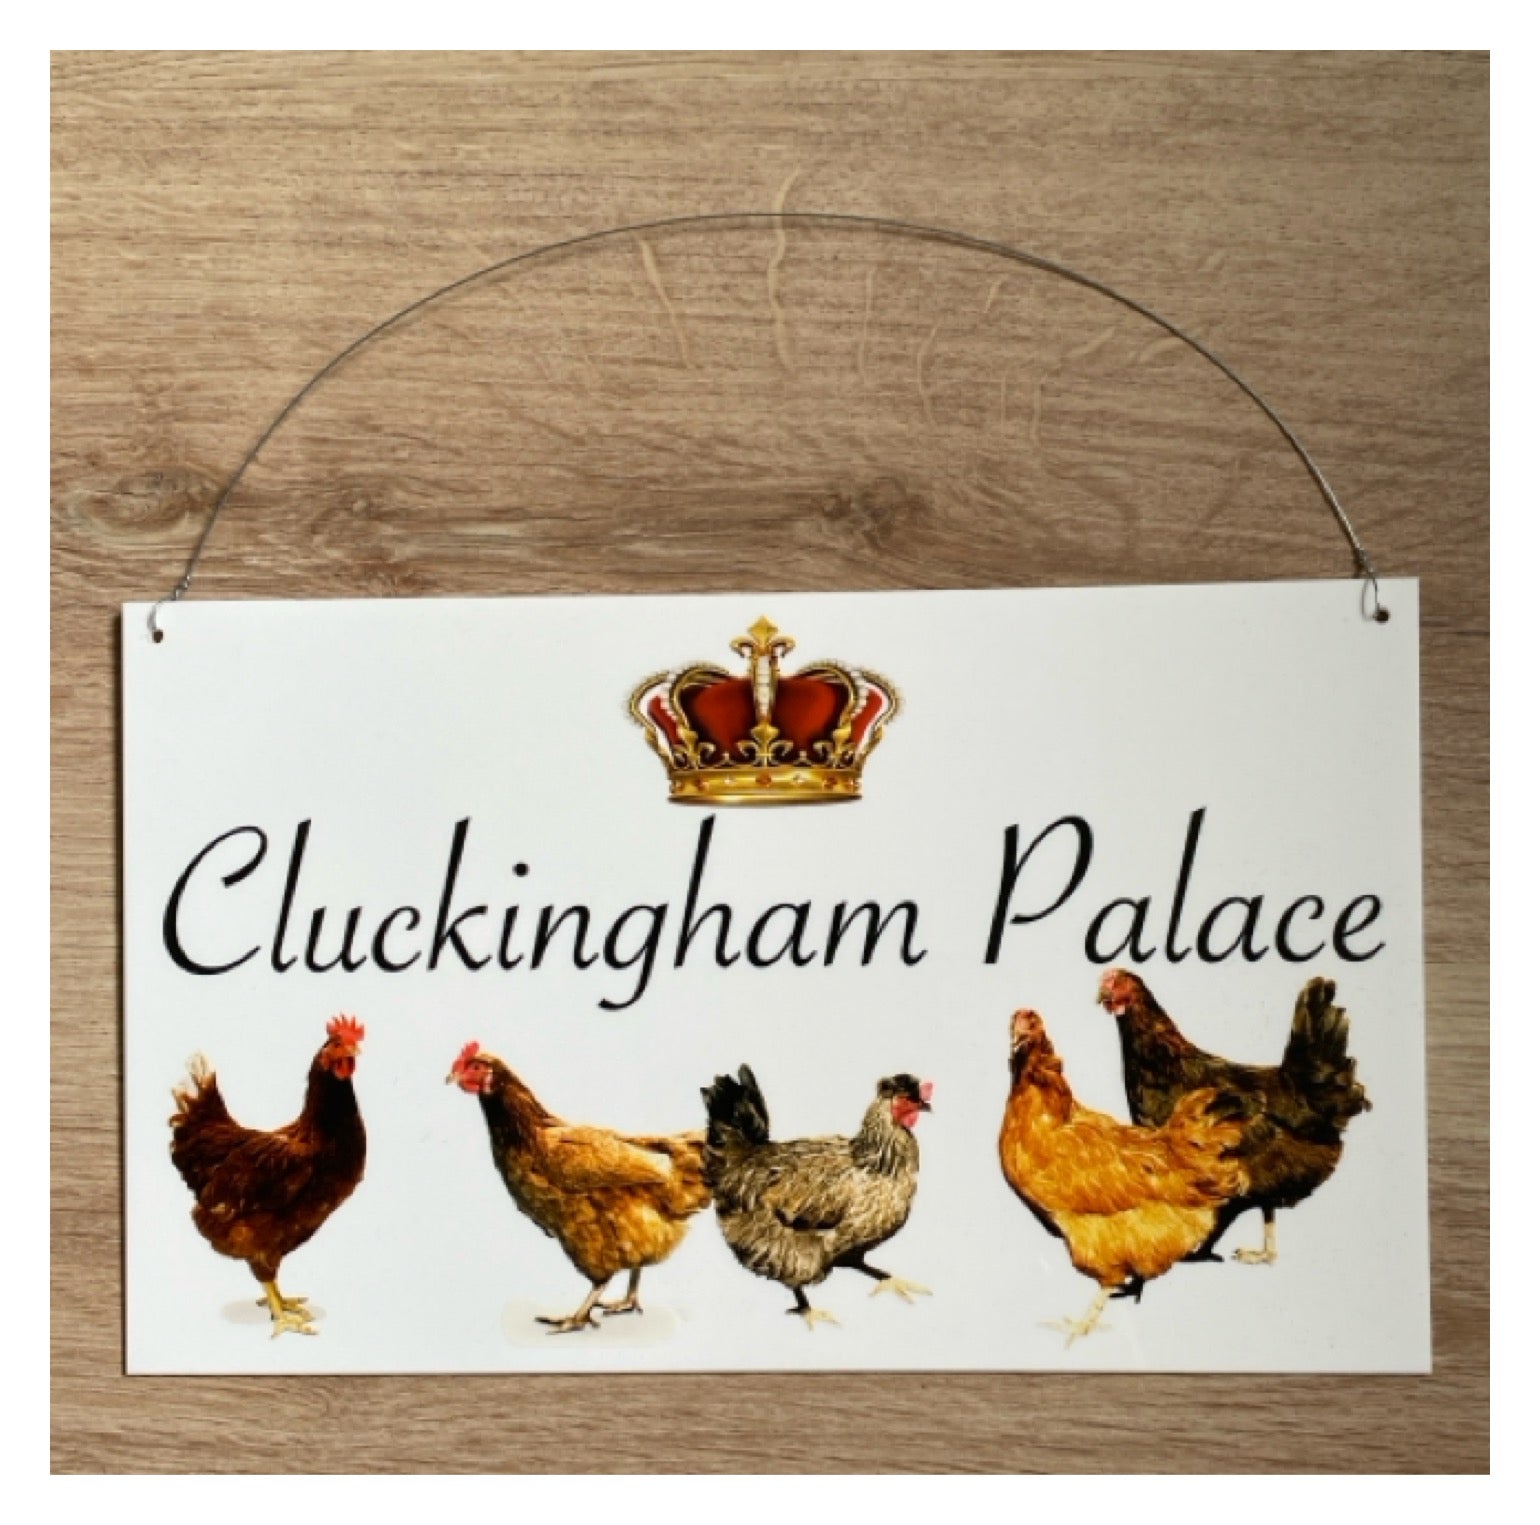 Cluckingham Palace Chicken Coop Sign - The Renmy Store Homewares & Gifts 